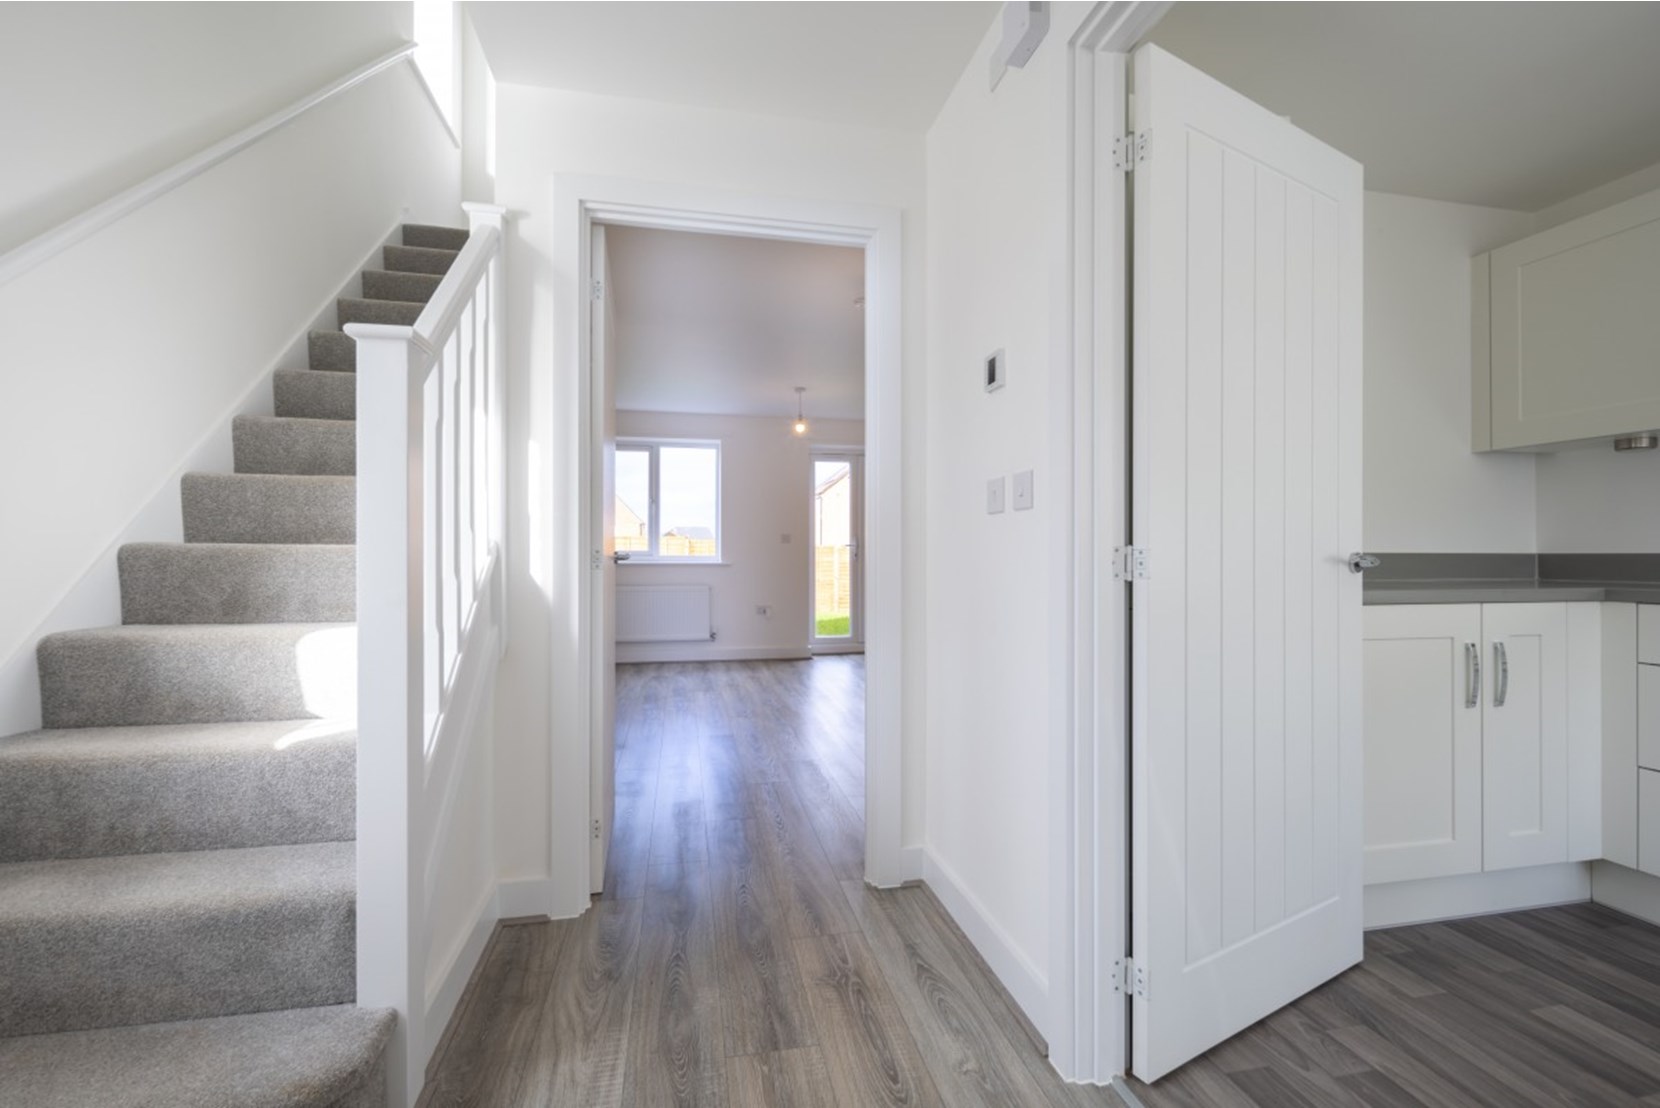 House-Allsop-The-Pioneers-Houlton-Rugby-interior-kitchen-hallway-stairs-layout